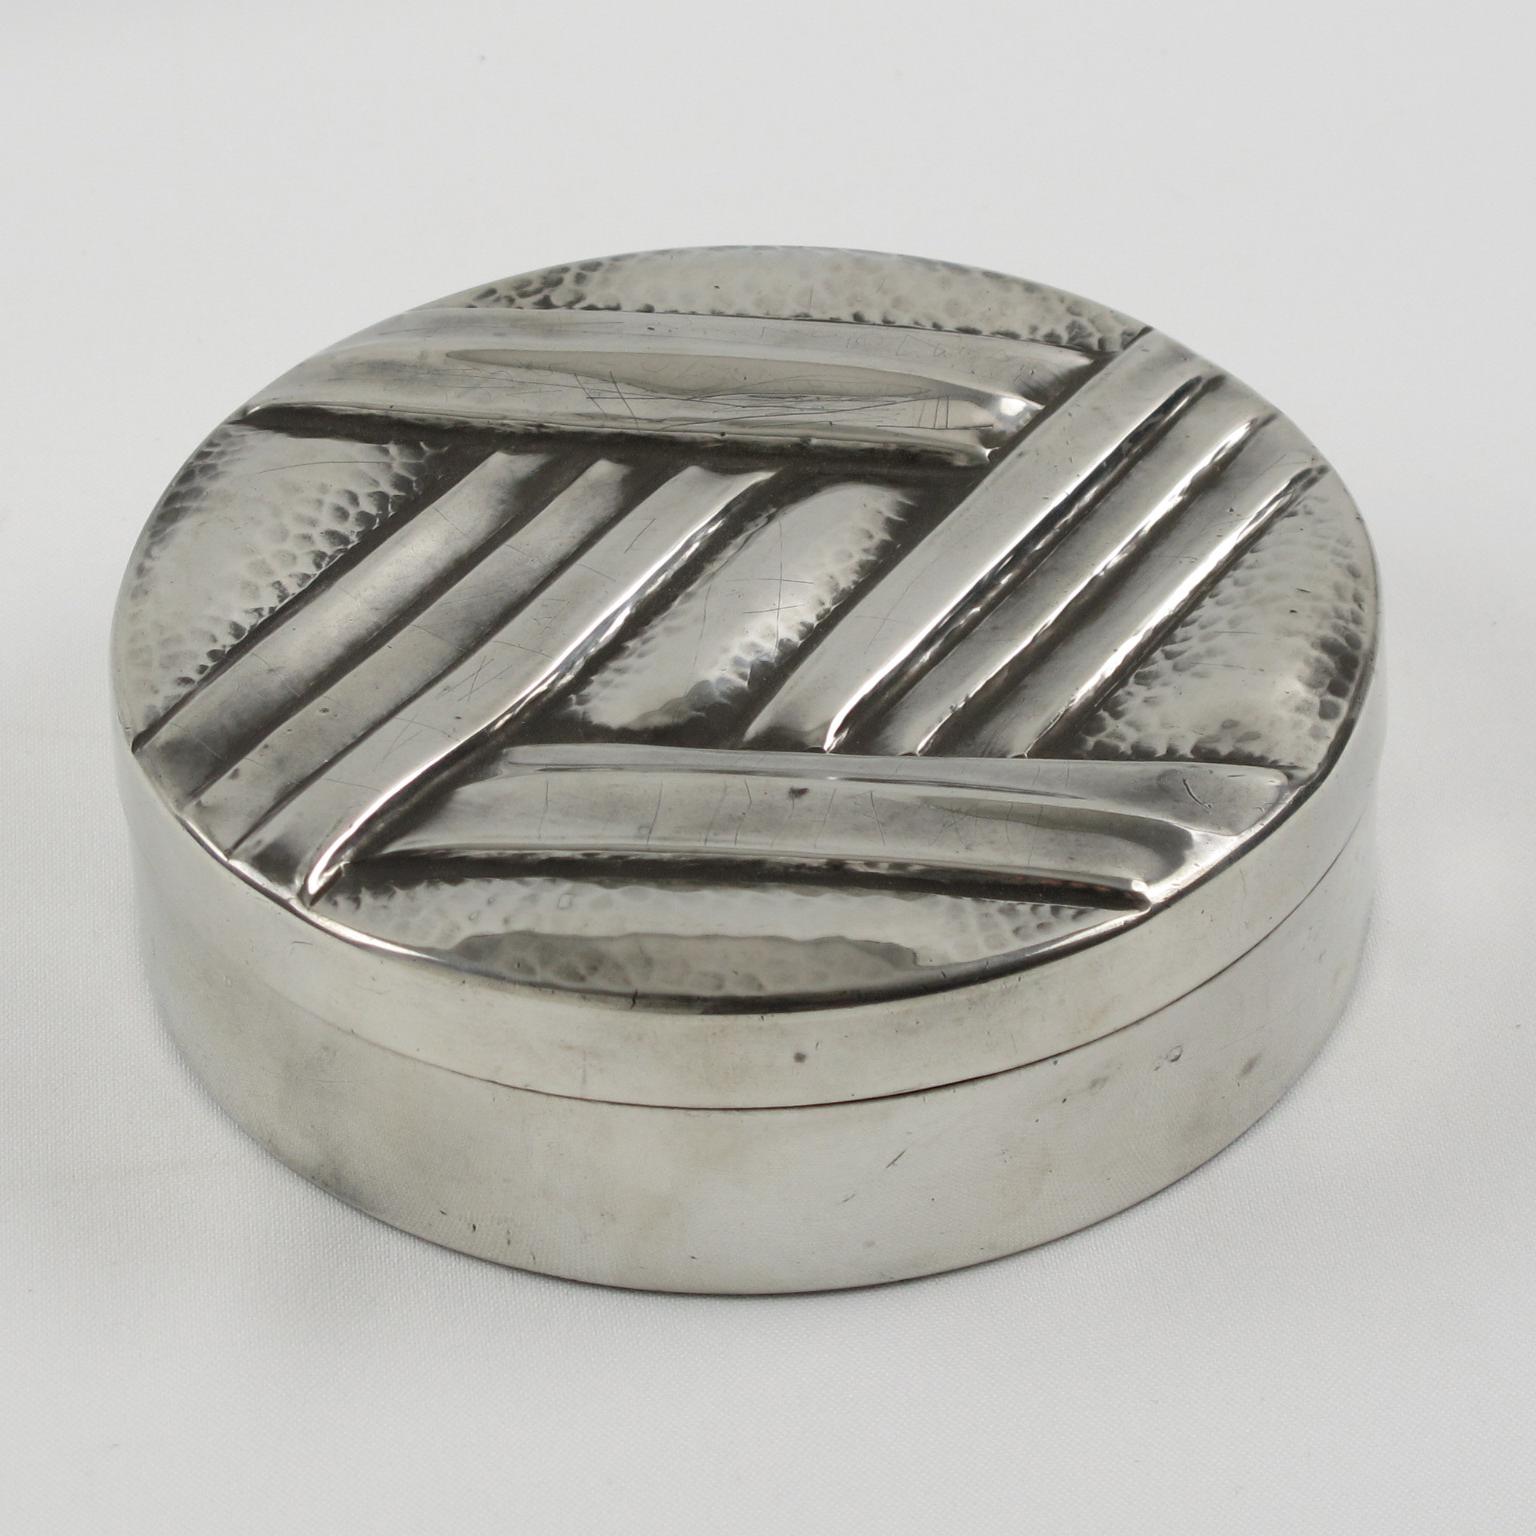 Elegant French Art Deco polished pewter decorative box by L. Guilbaud. Perfect for vanity or boudoir or any modern Art Deco interior. Round lidded shape with carved and embossed typical Art Deco geometric design, signed 'L. Guilbaud' underside.